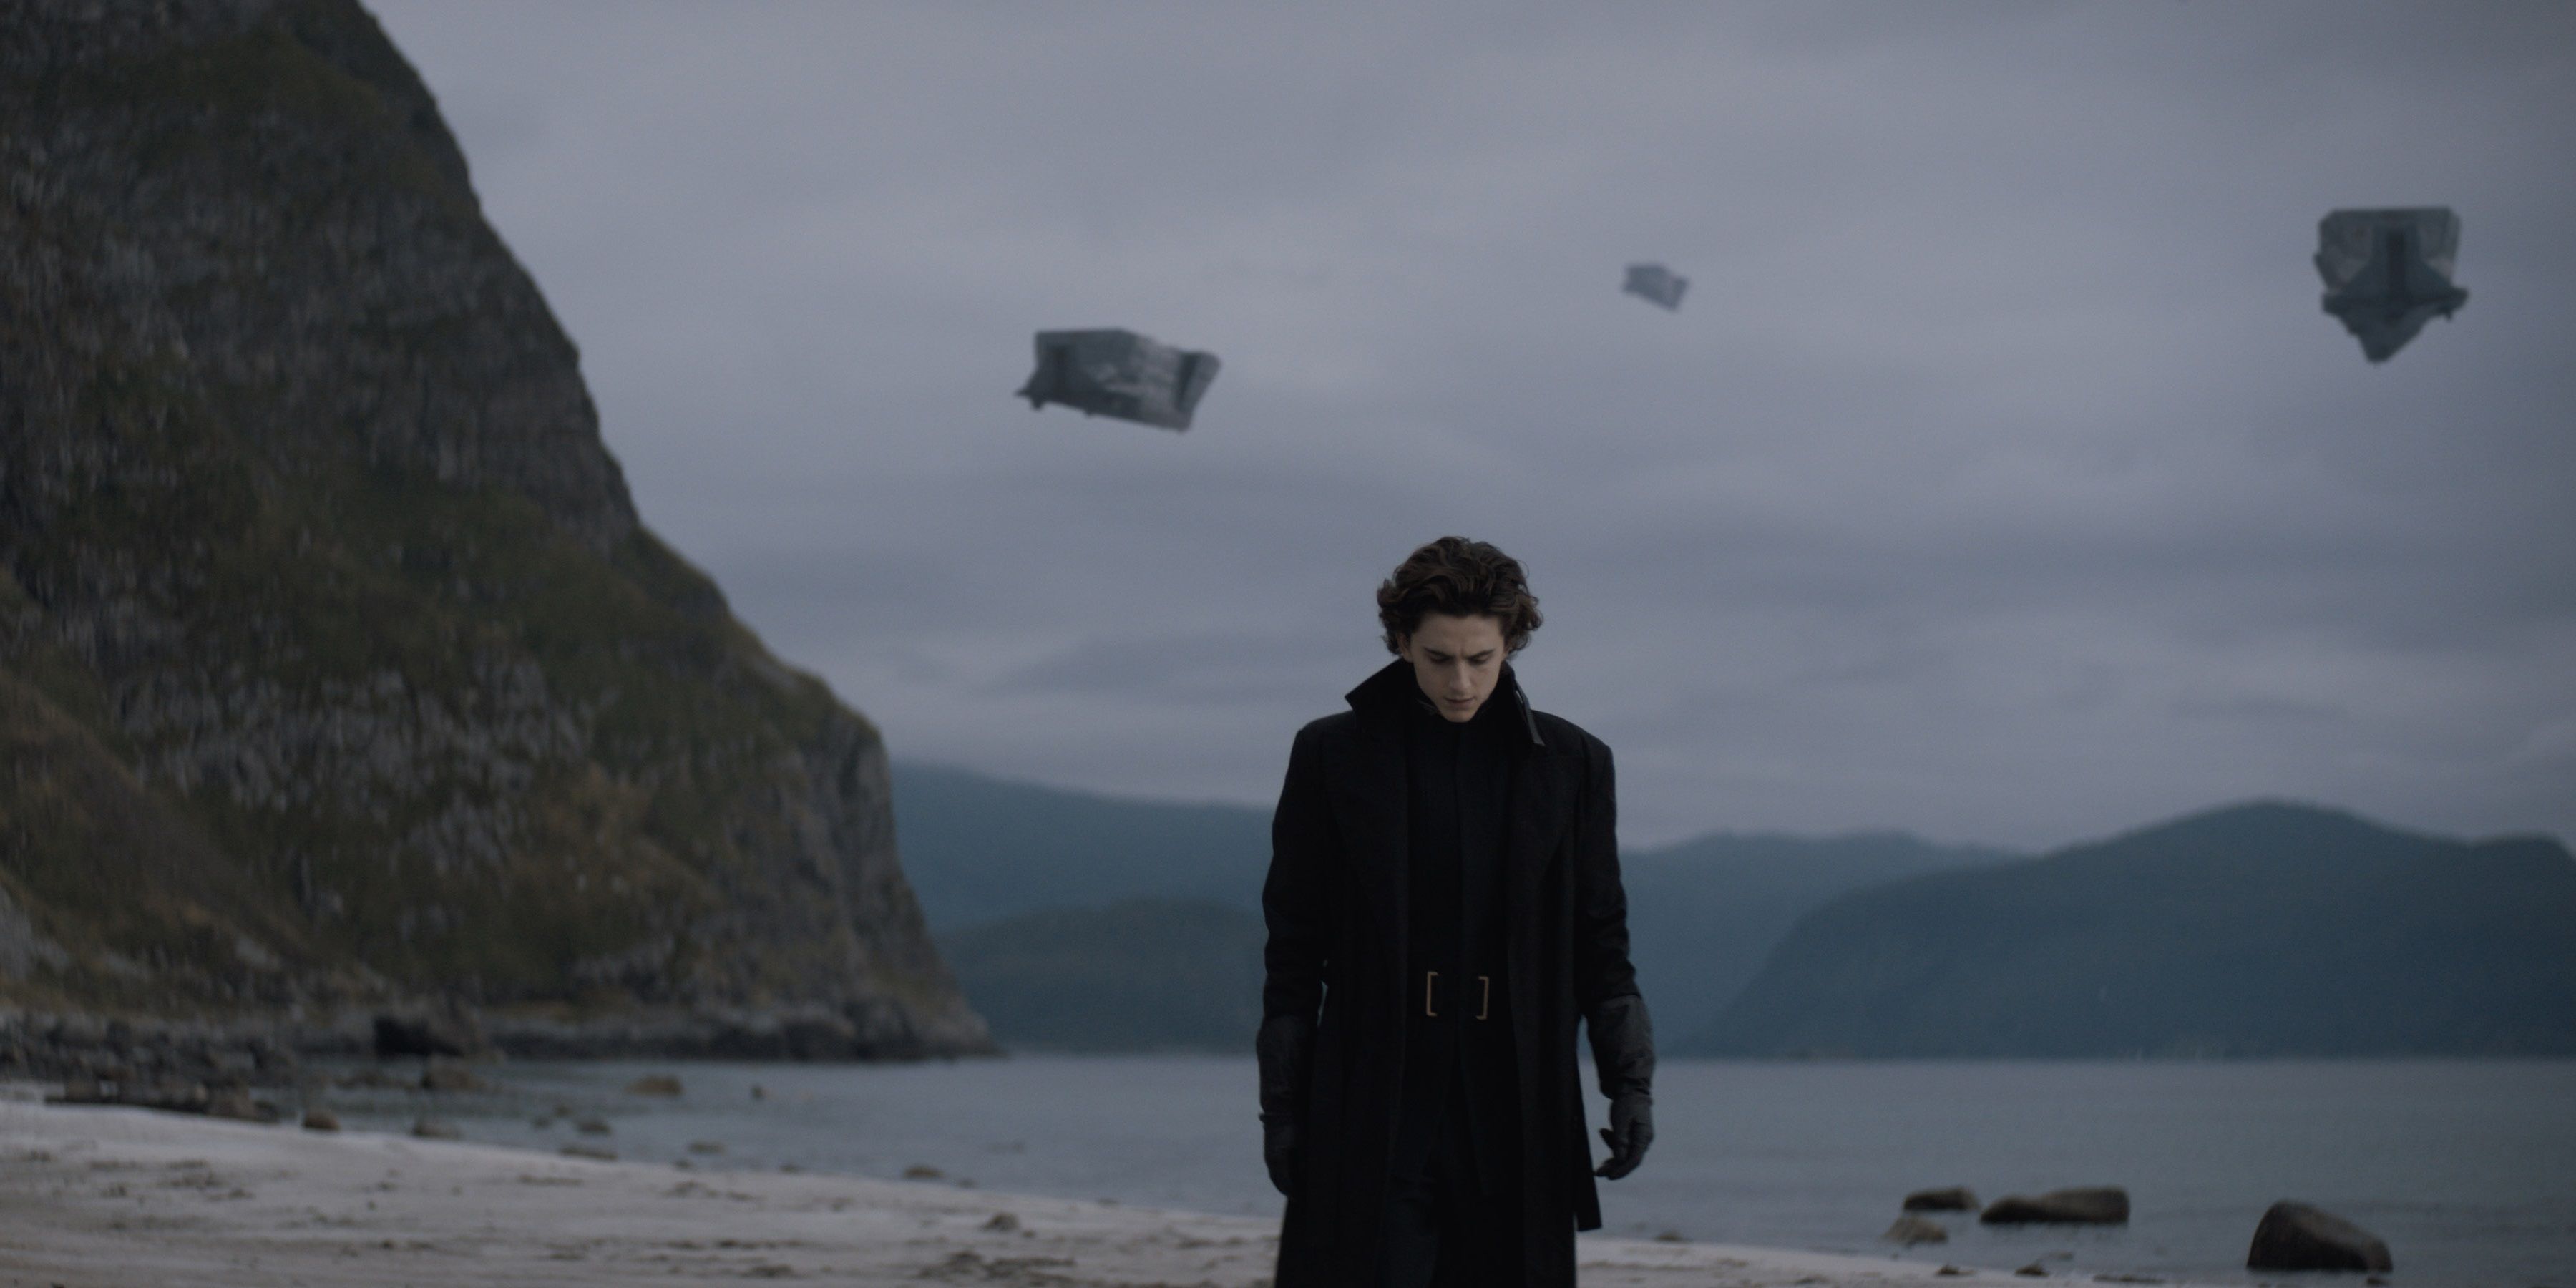 Paul Atreides with spaceships in the background in Dune